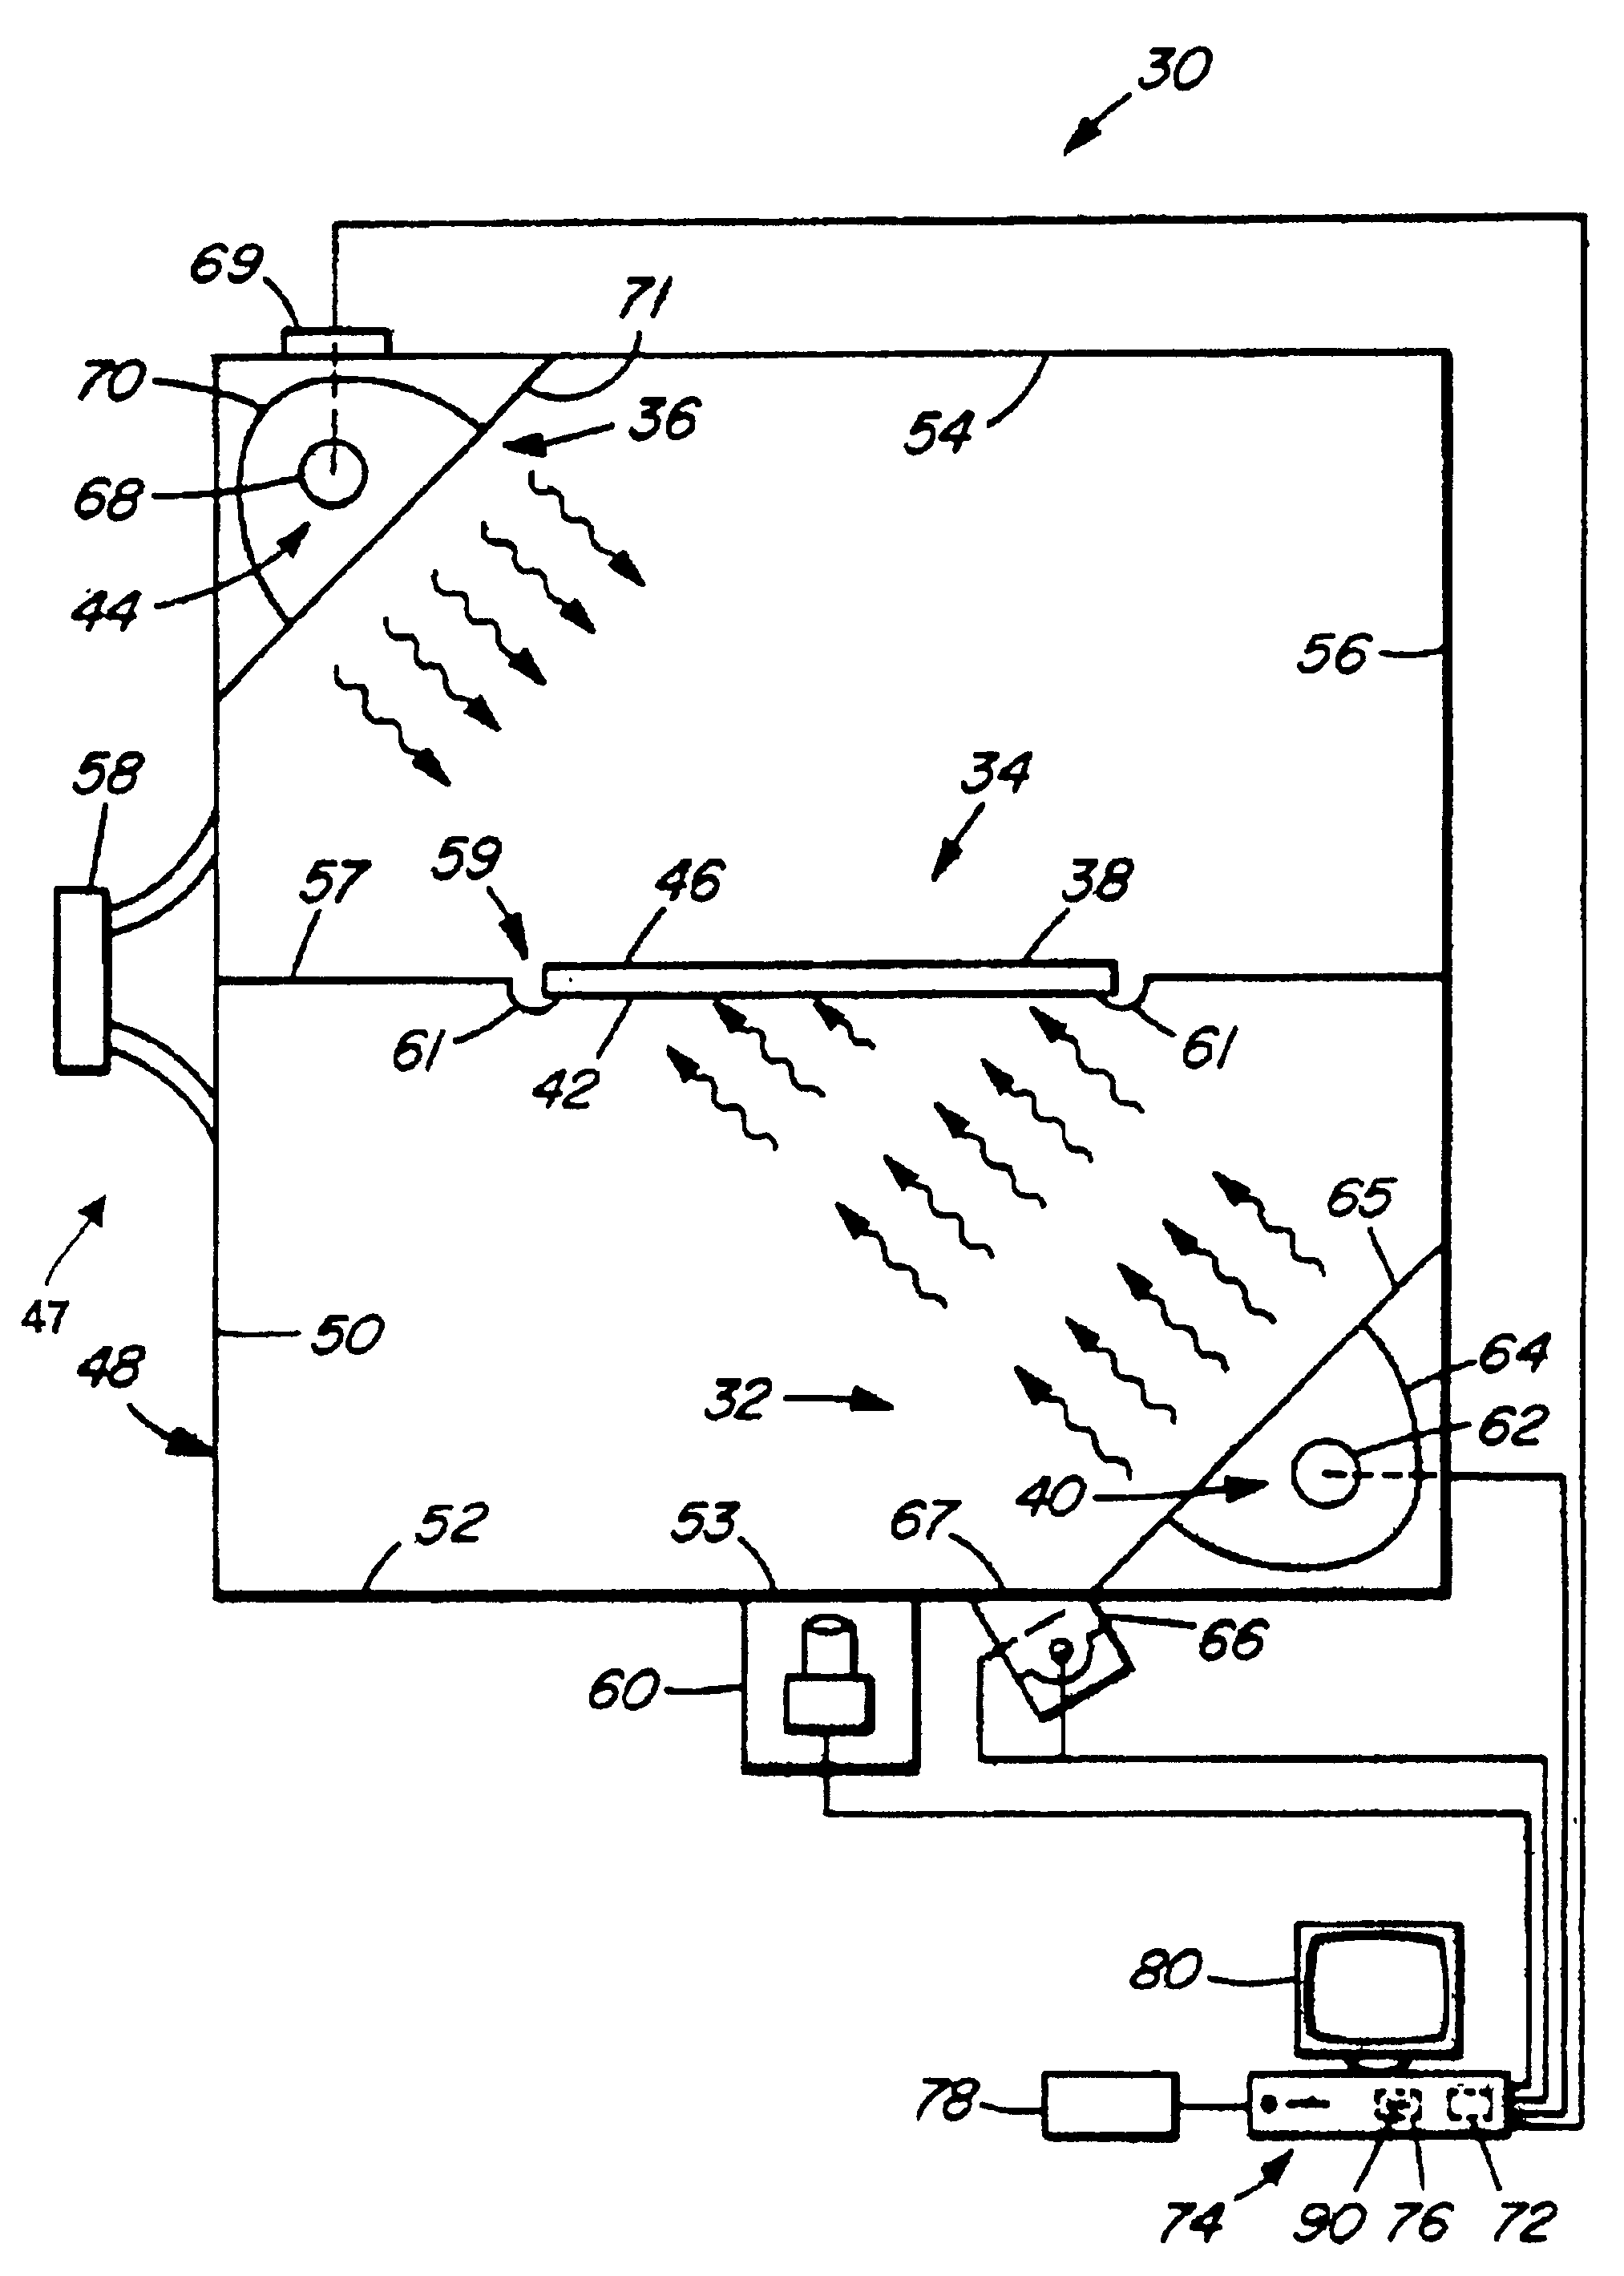 Heat-treating methods and systems